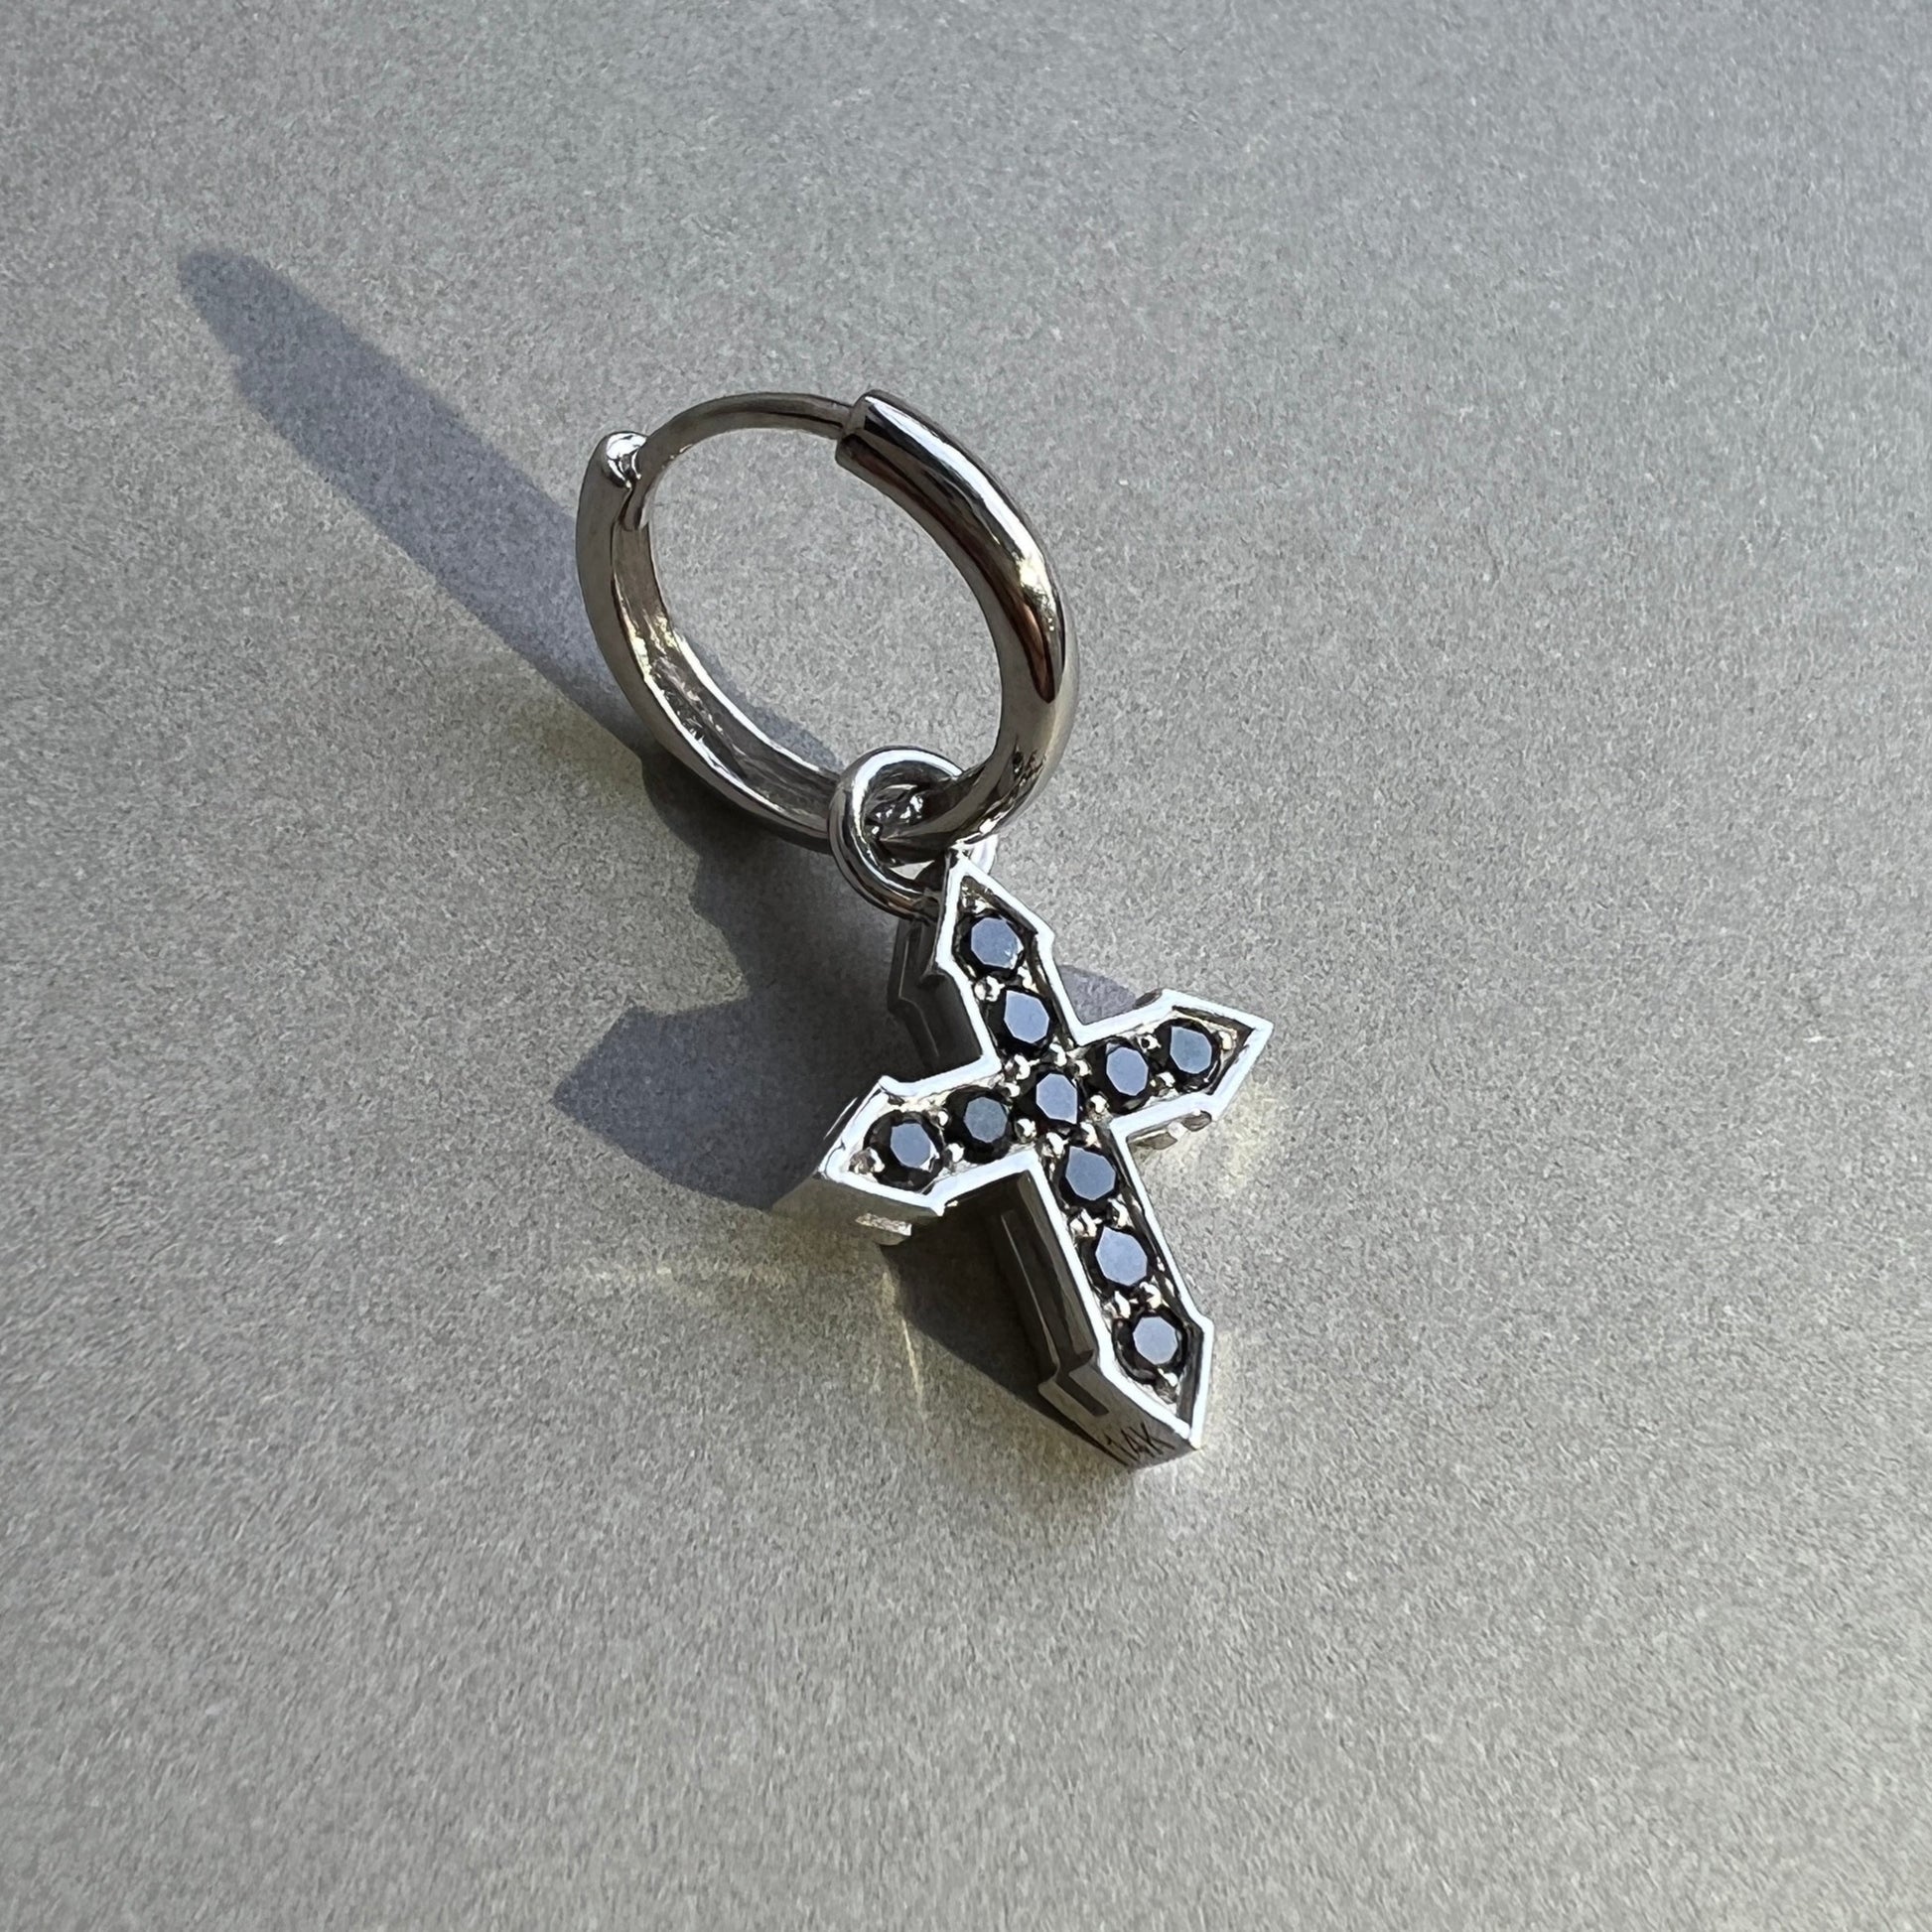 EARRING CROSS "GLOW" WITH BLACK DIAMONDS / SOLID GOLD